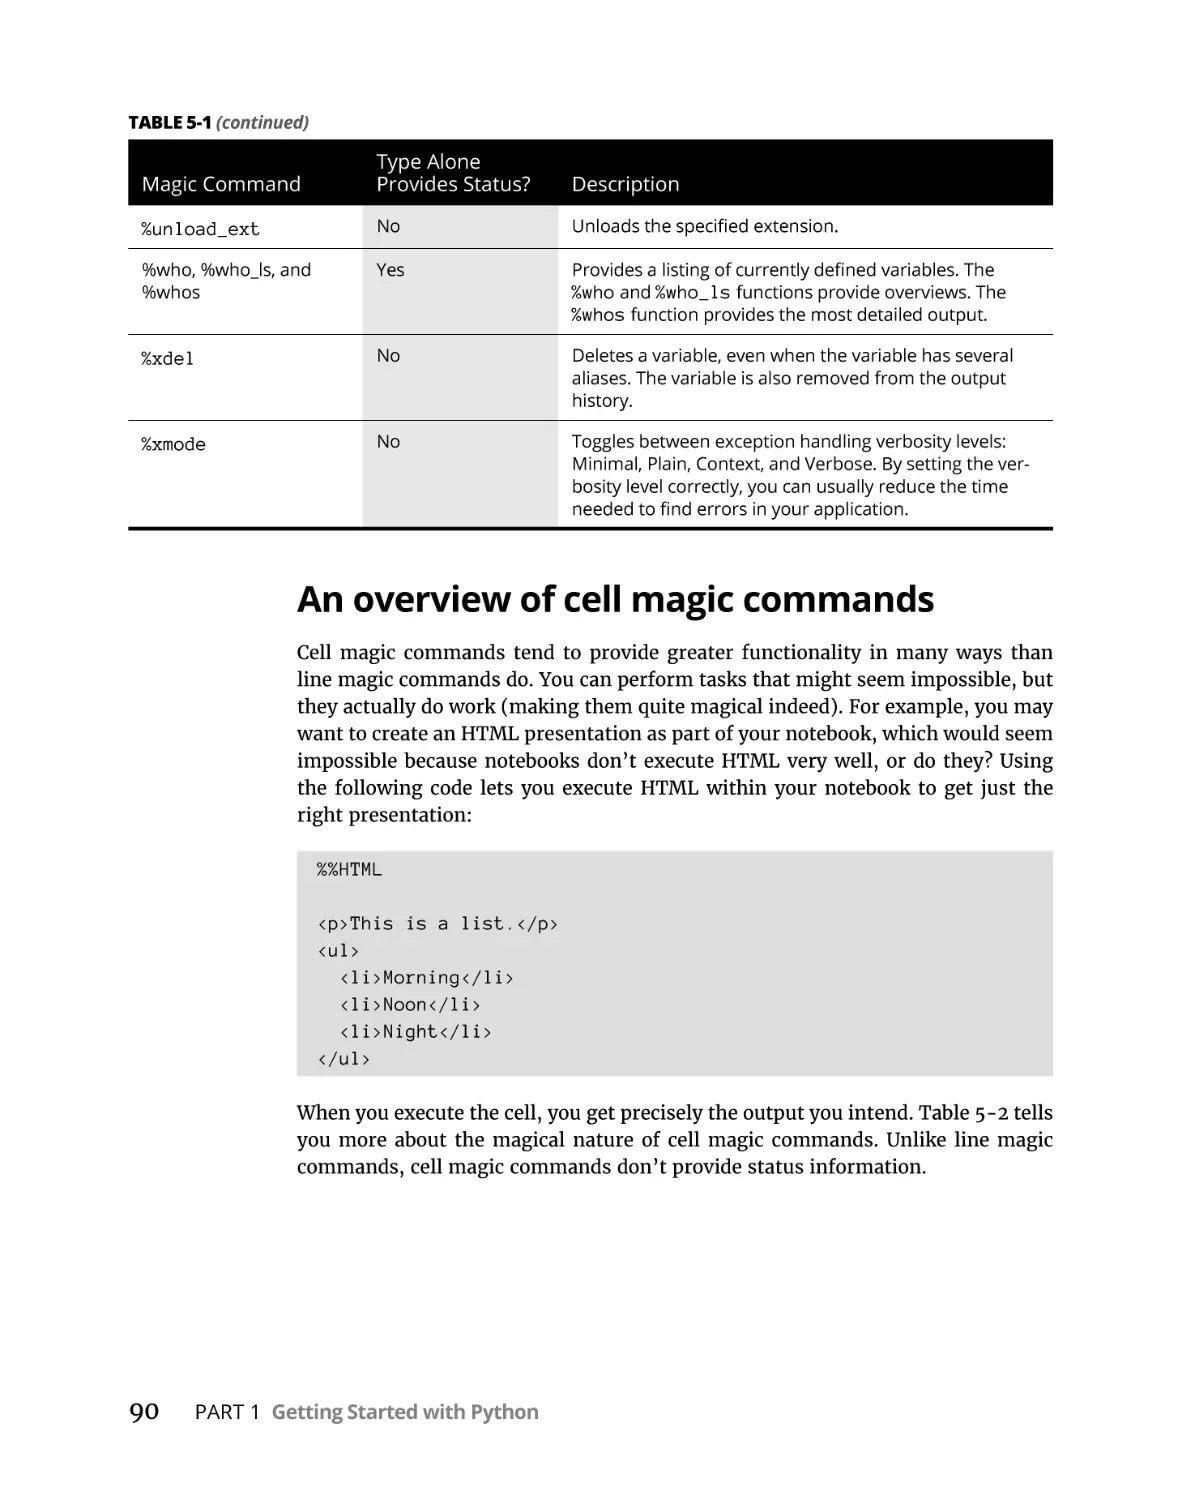 An overview of cell magic commands